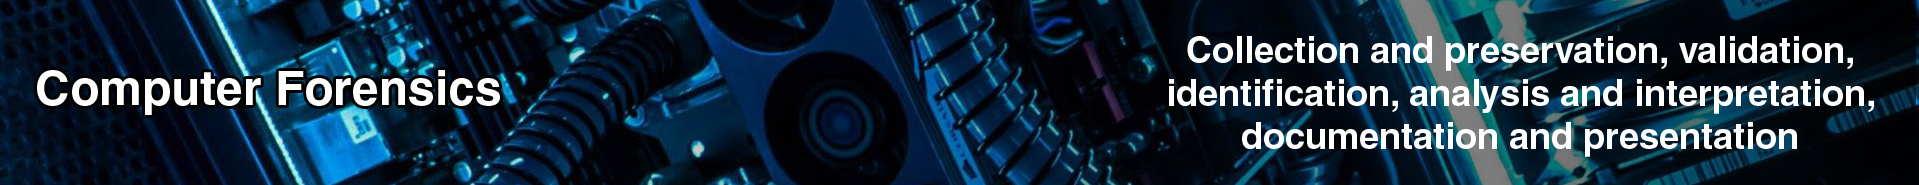 Computer forensic banner